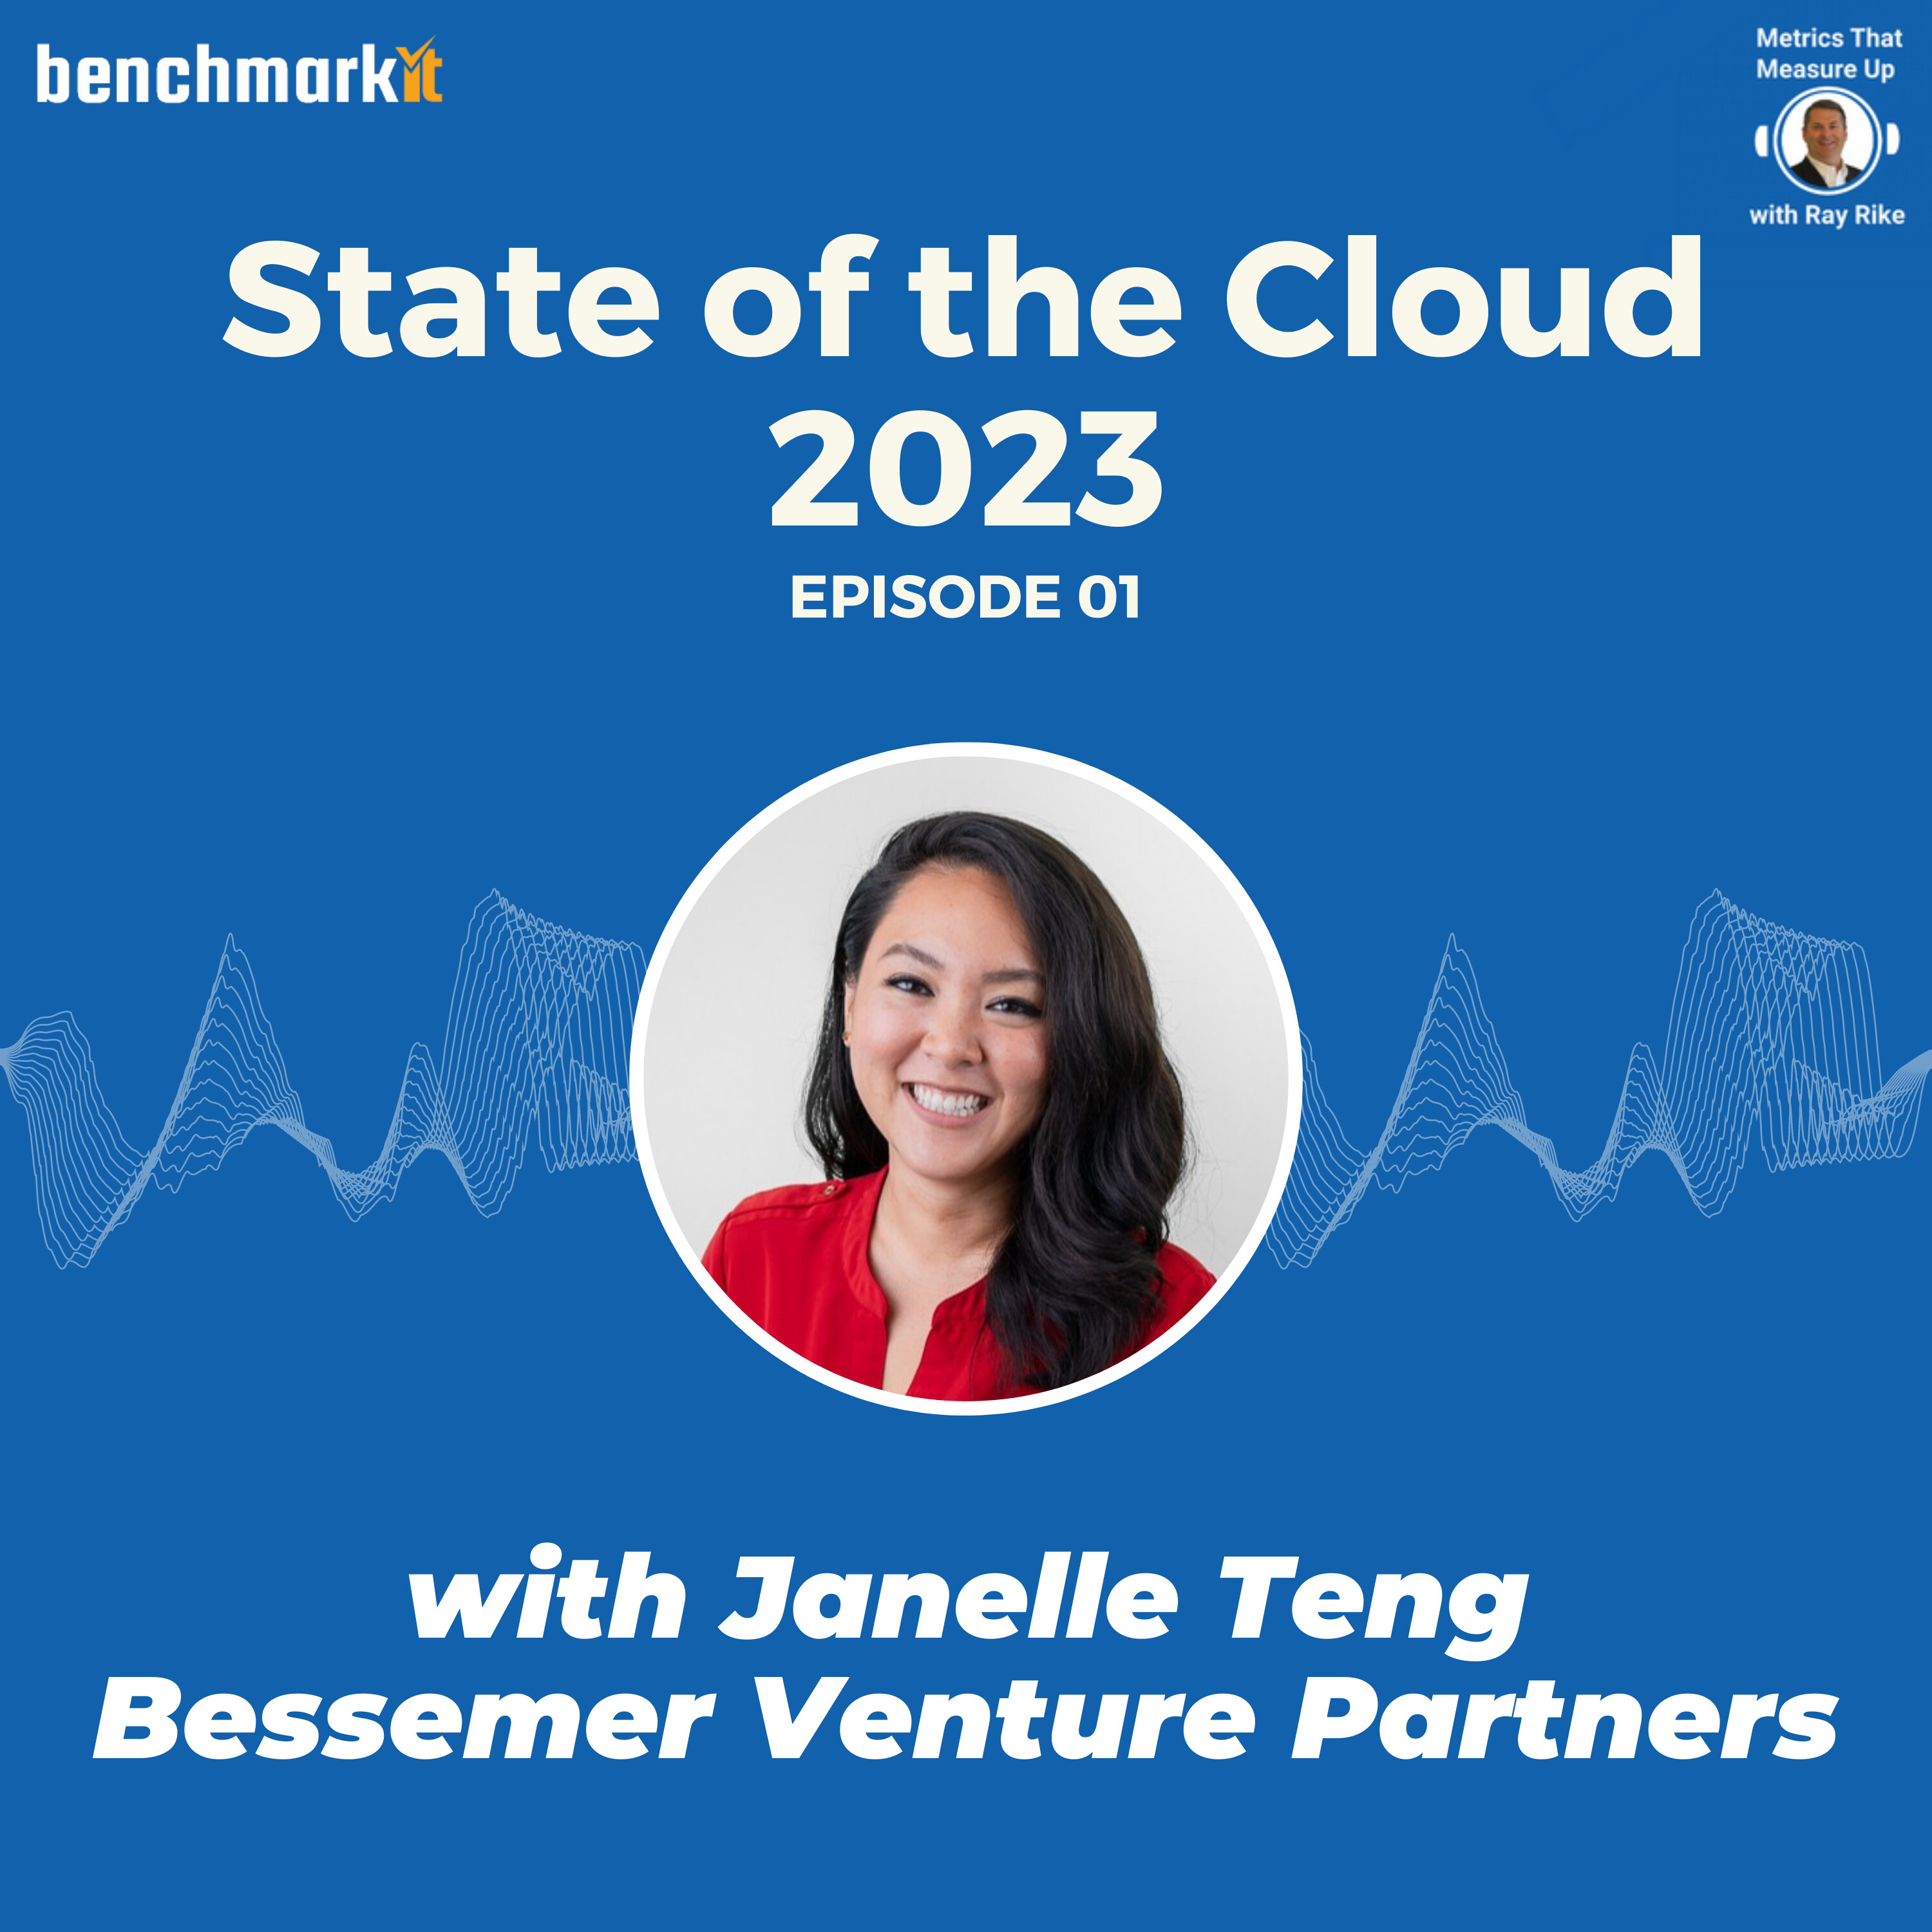 State of the Cloud 2023 - with Janelle Teng, Bessemer Venture Partners (Episode #1)